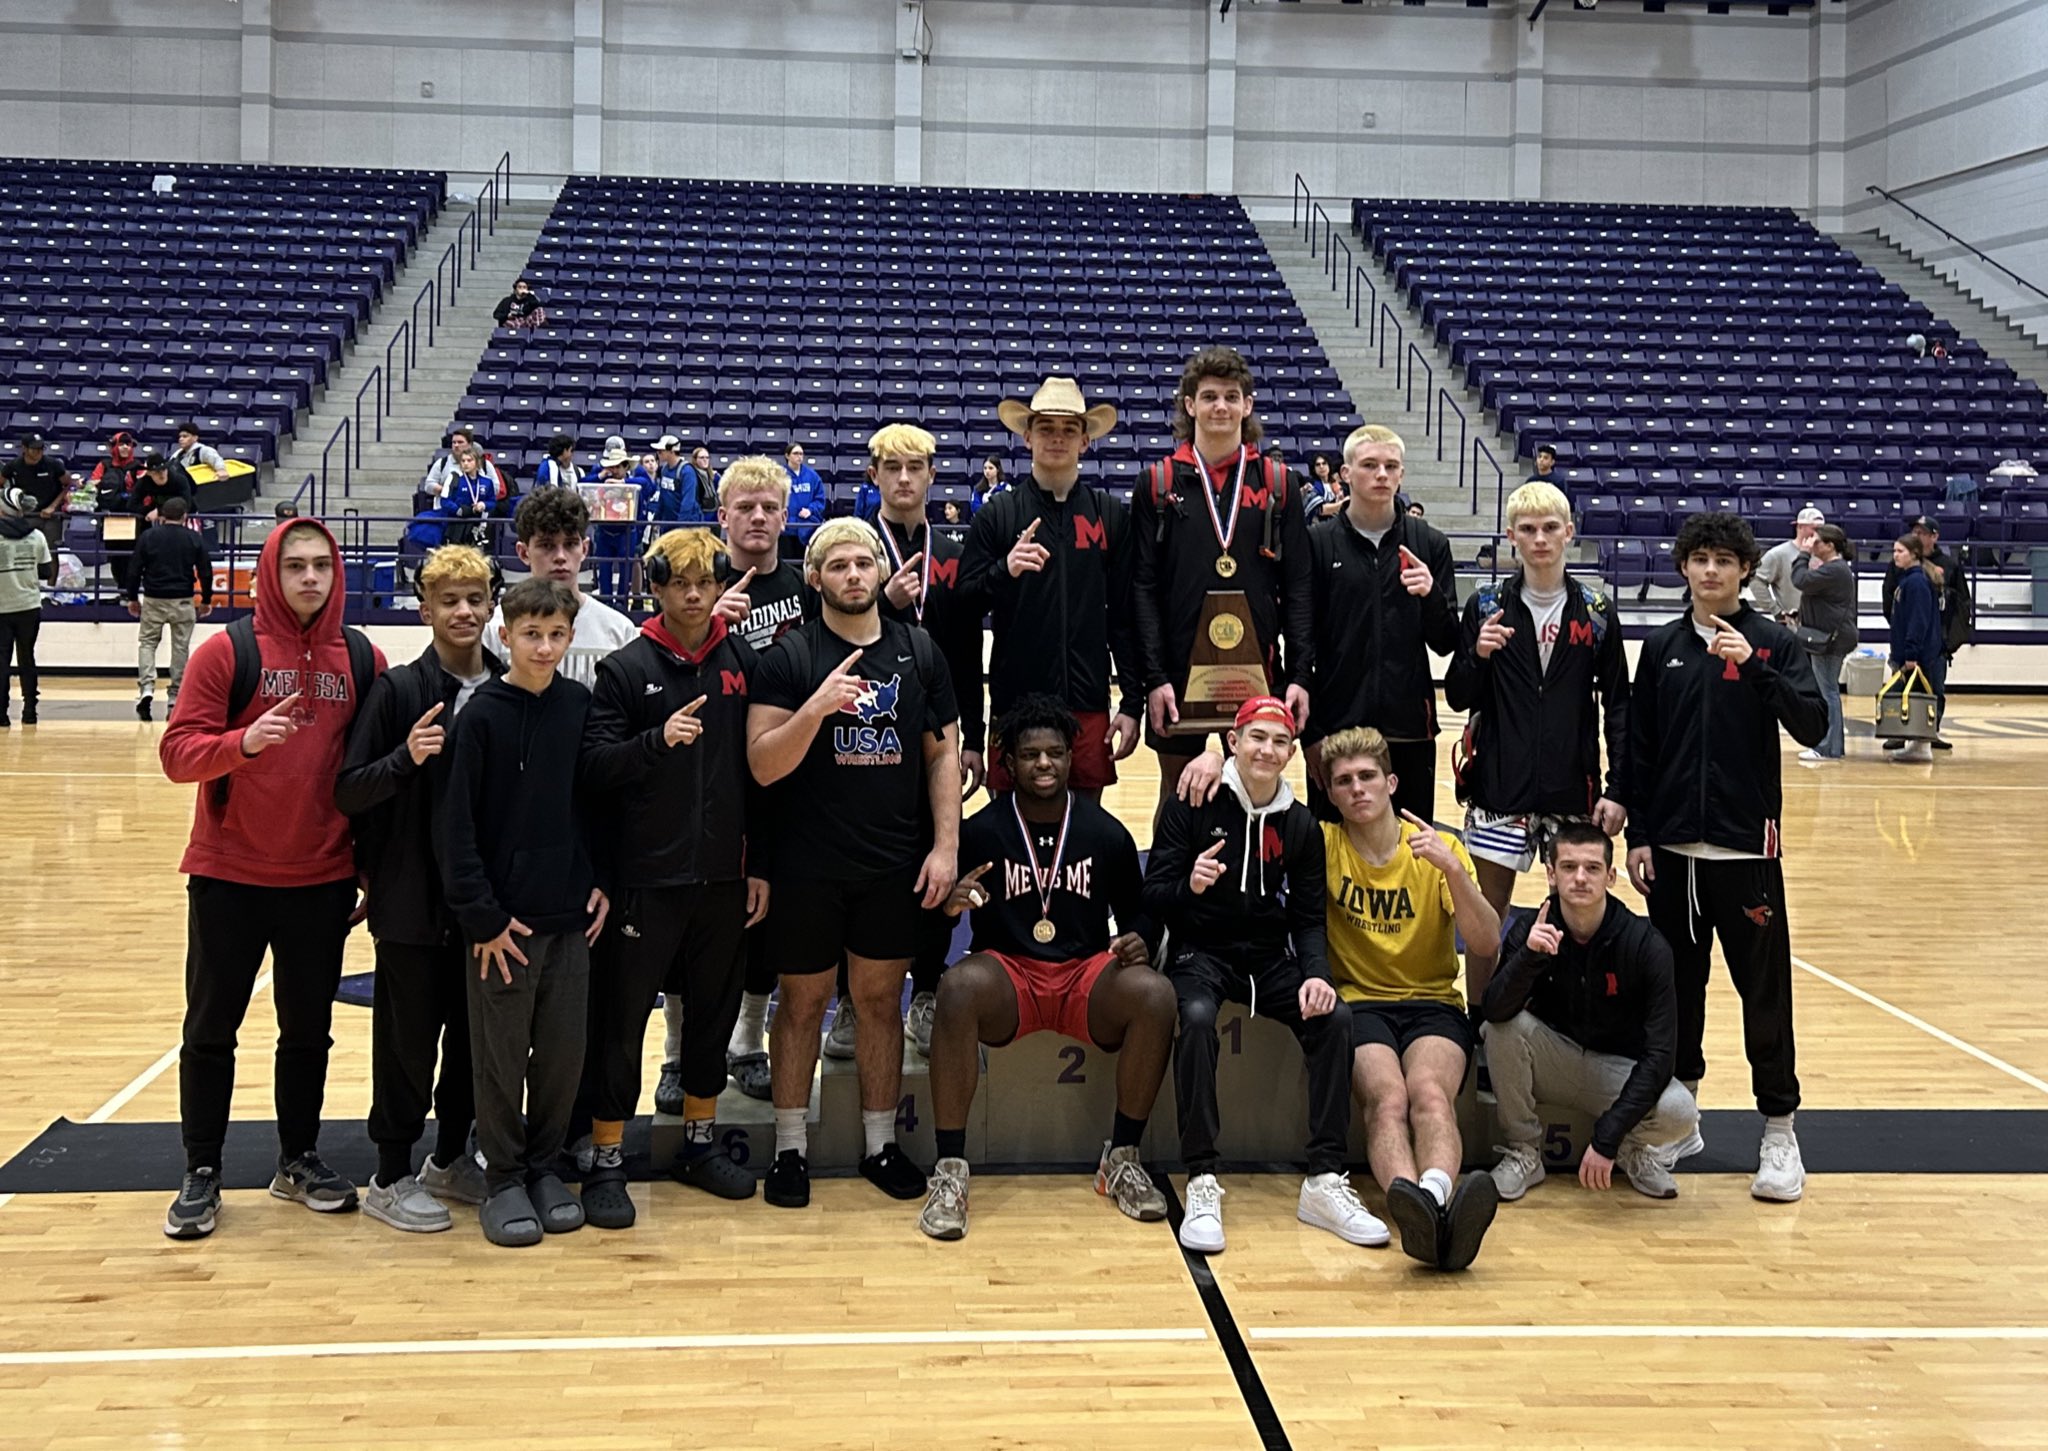 Cardinal Wrestling Triumphs with State Champion Wins and Strong Performances in Tournaments